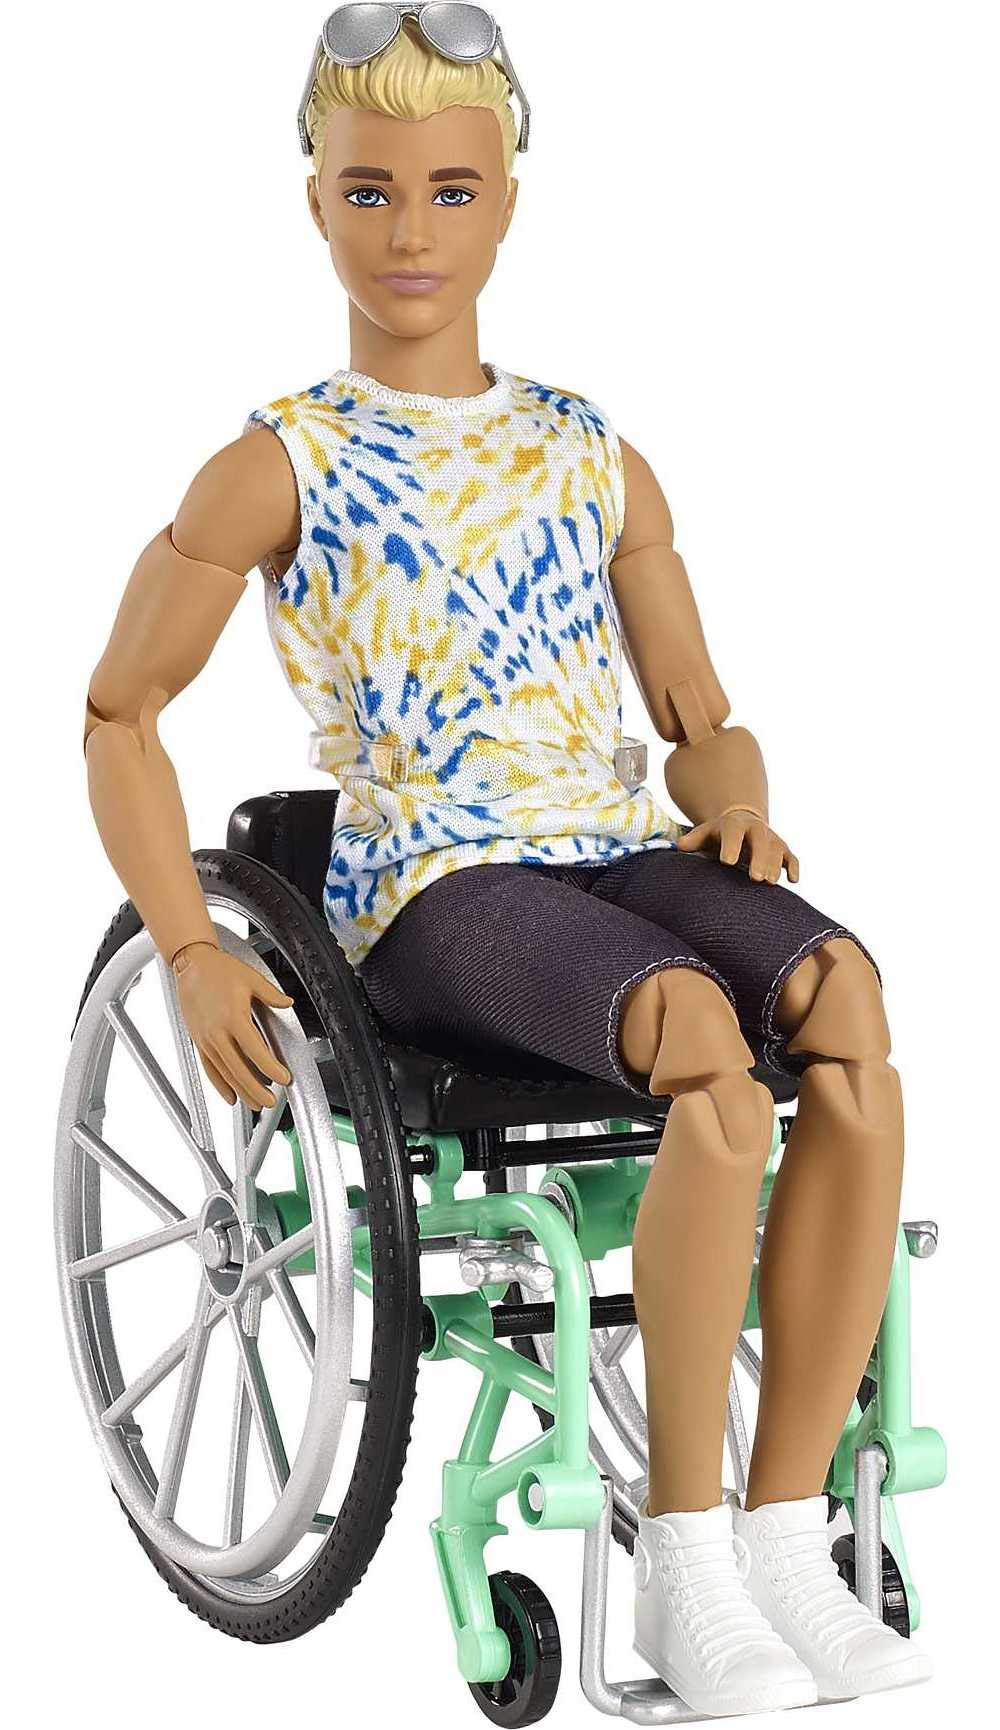 Barbie Ken Fashionistas Doll #167 with Wheelchair & Ramp Wearing Tie-Dye Shirt, Black Shorts, White Sneakers & Sunglasses, Toy for Kids 3 to 8 Years Old